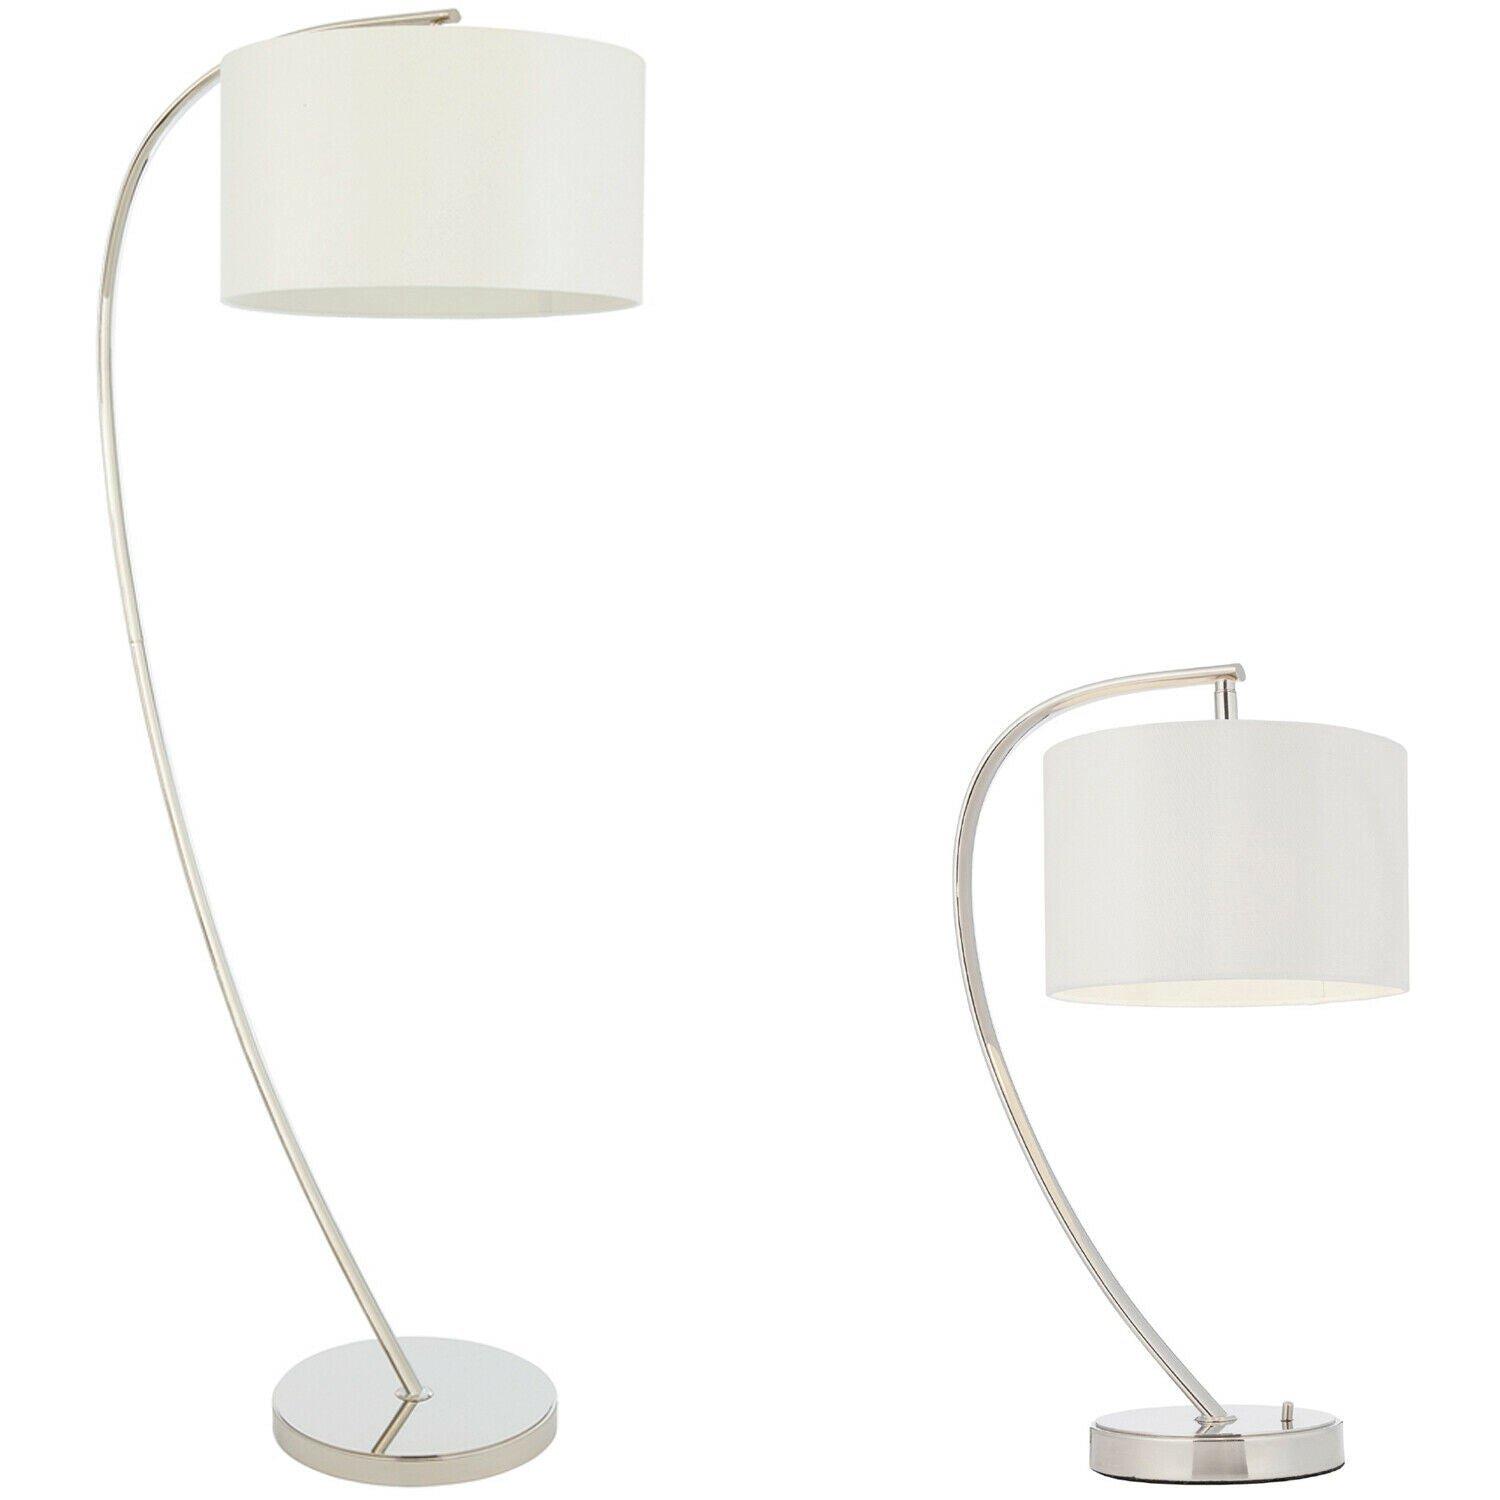 Standing Floor & Table Lamp Set Bright Nickel & White Shade Curved Stem Light